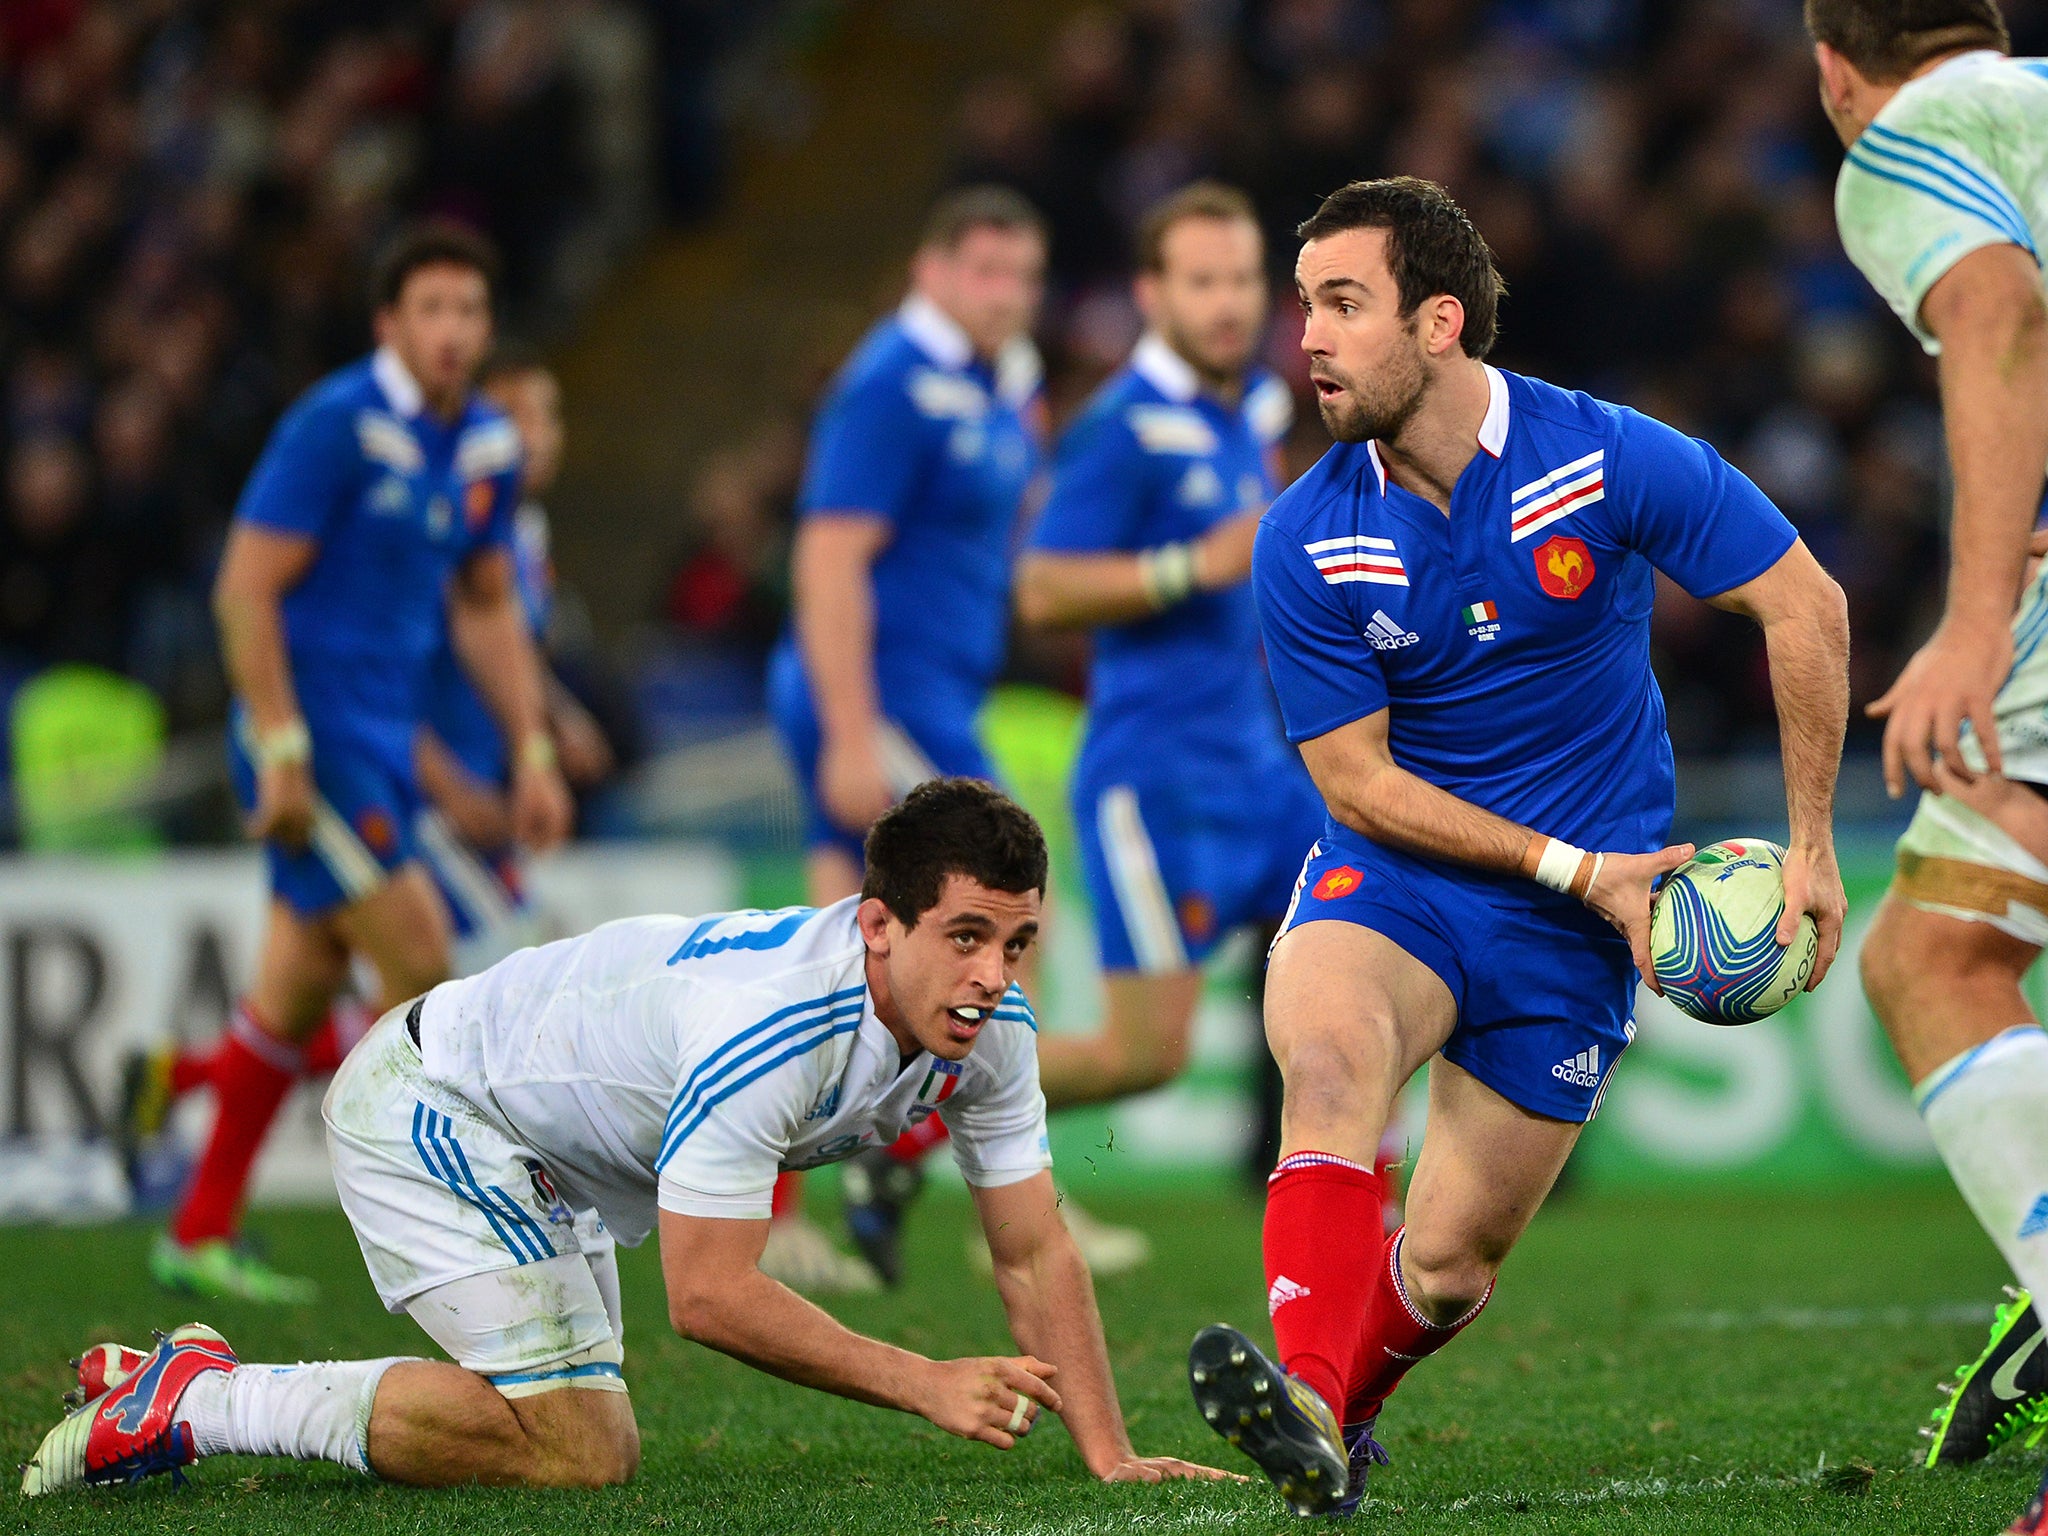 France's scrum-half Morgan Parra gives the ball during the Six Nations international rugby union match Italy vs France in Rome's Olimpic Stadium.